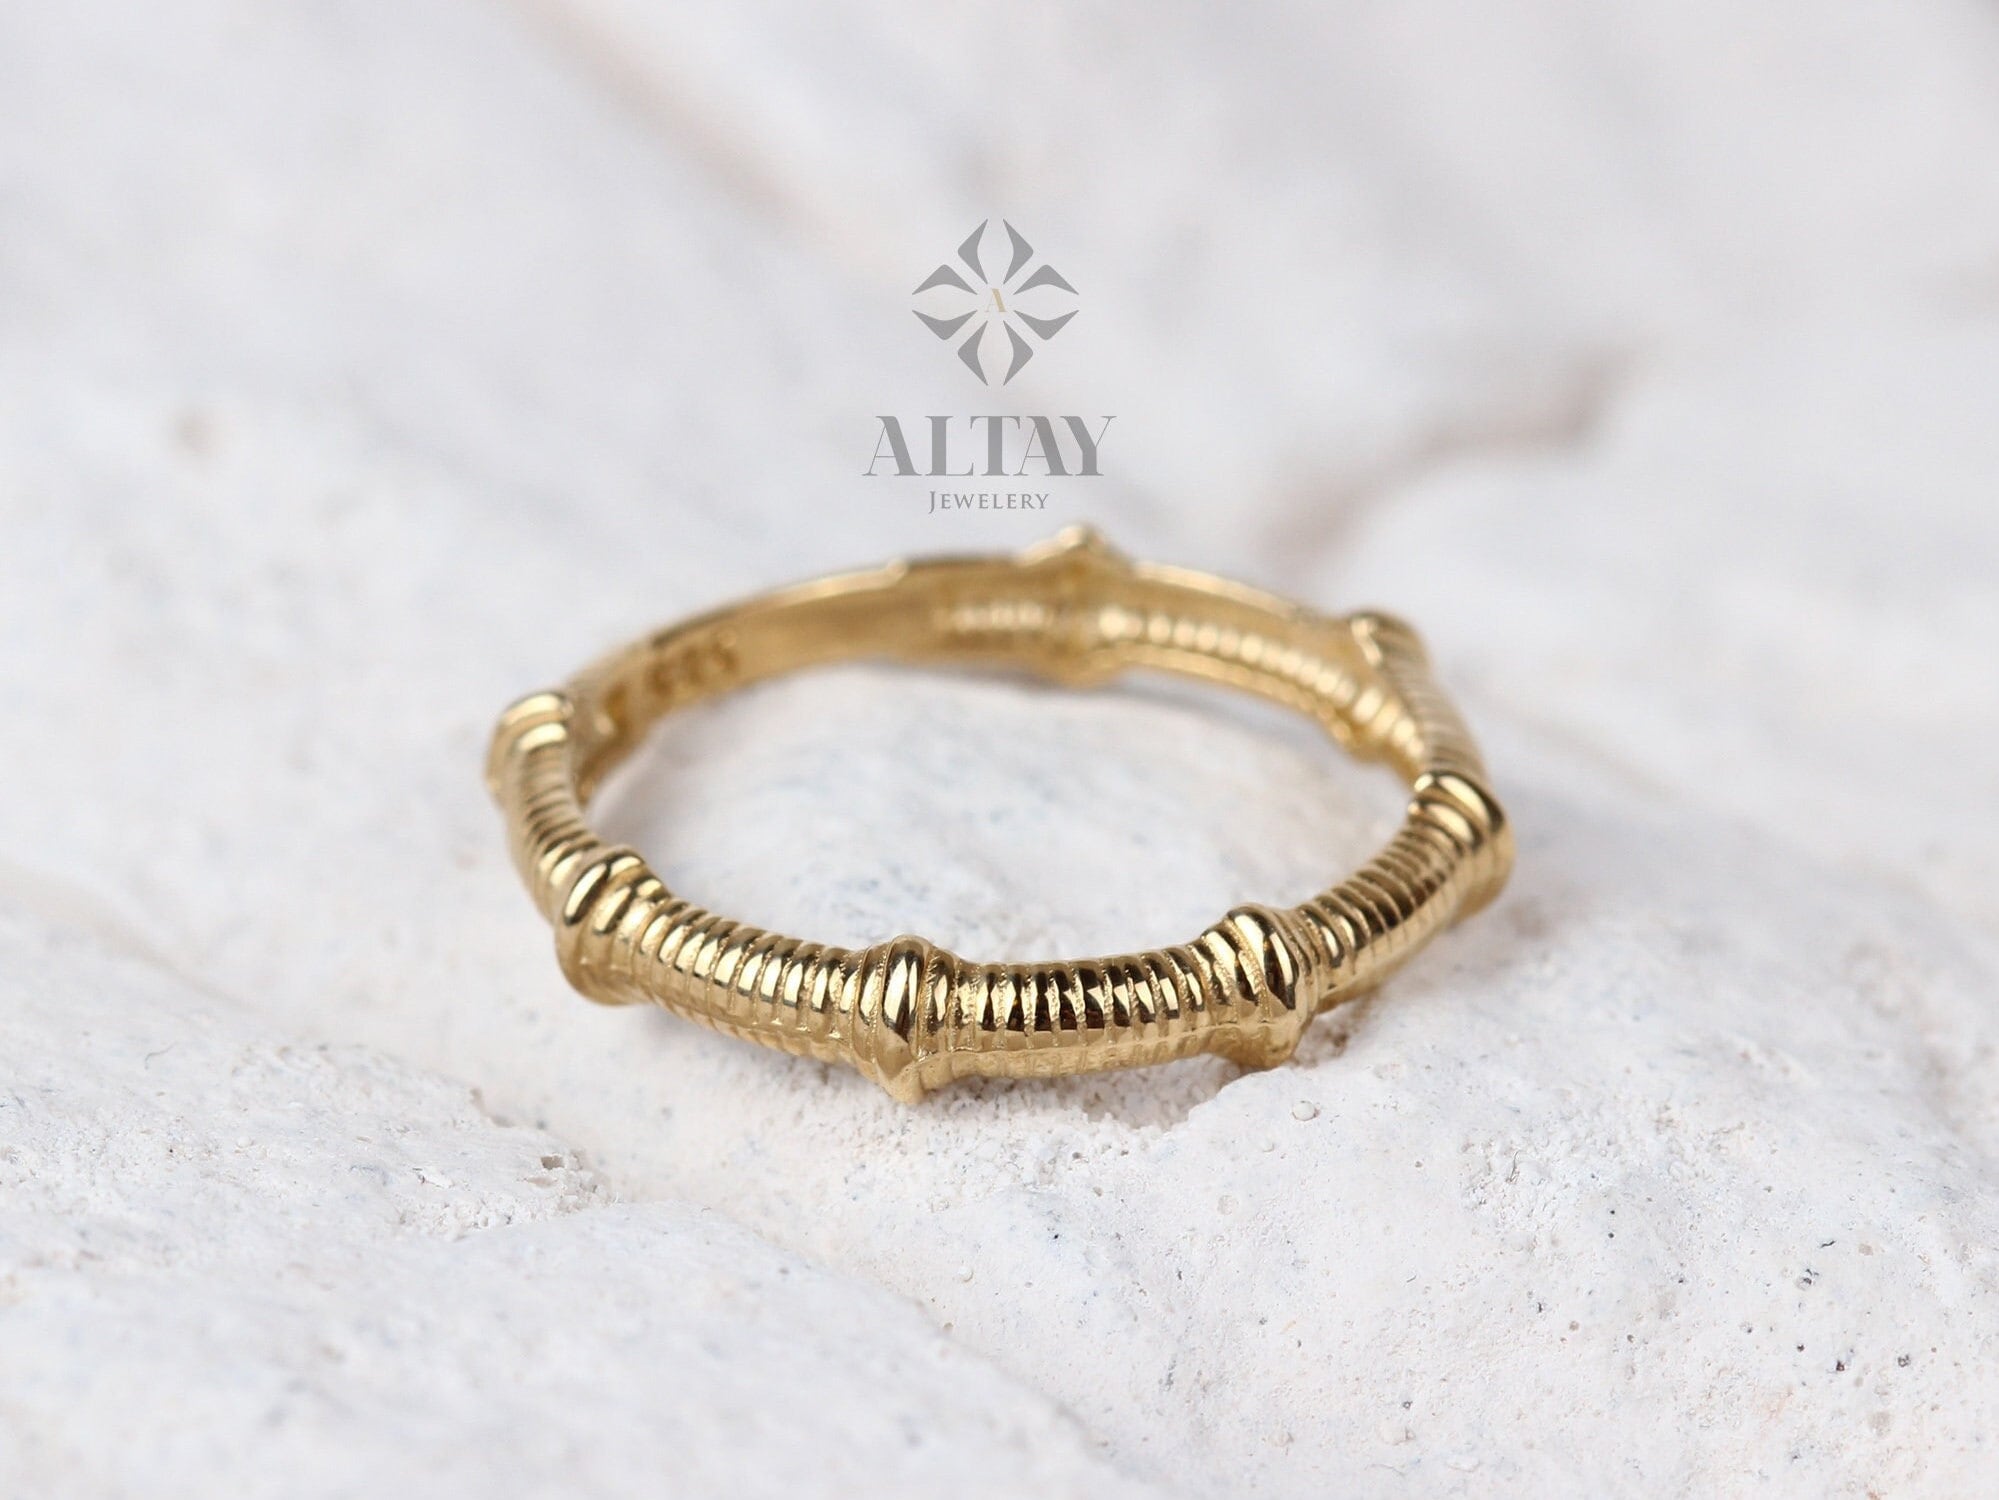 14K Gold Bamboo Ring, Thin Bone Gold Ring, Yellow Stackable Ring, Dainty Ring, Elegant Stylish Fine Jewelry, Real Gold, Gift for Her